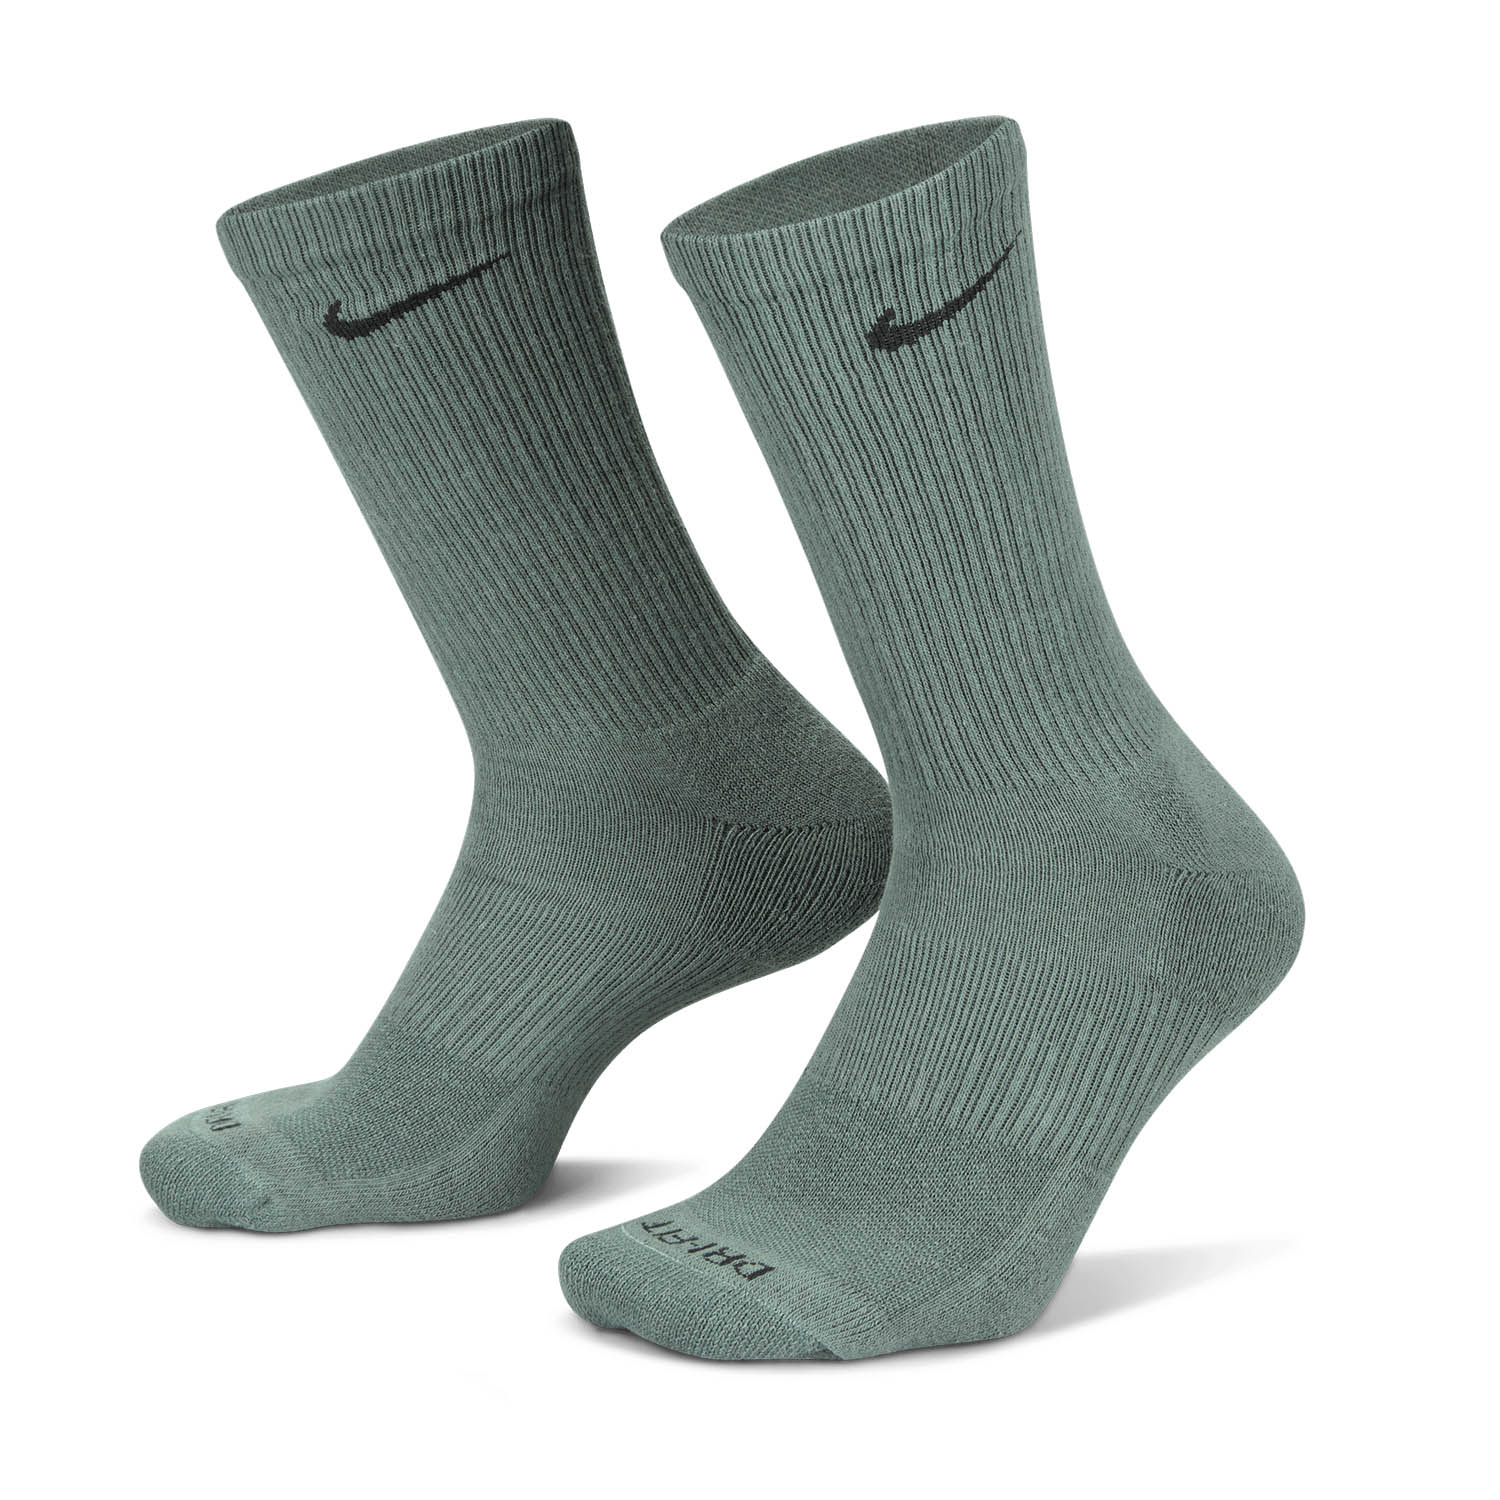 Nike Everyday Plus Cushioned x 3 Calcetines de Running - Green